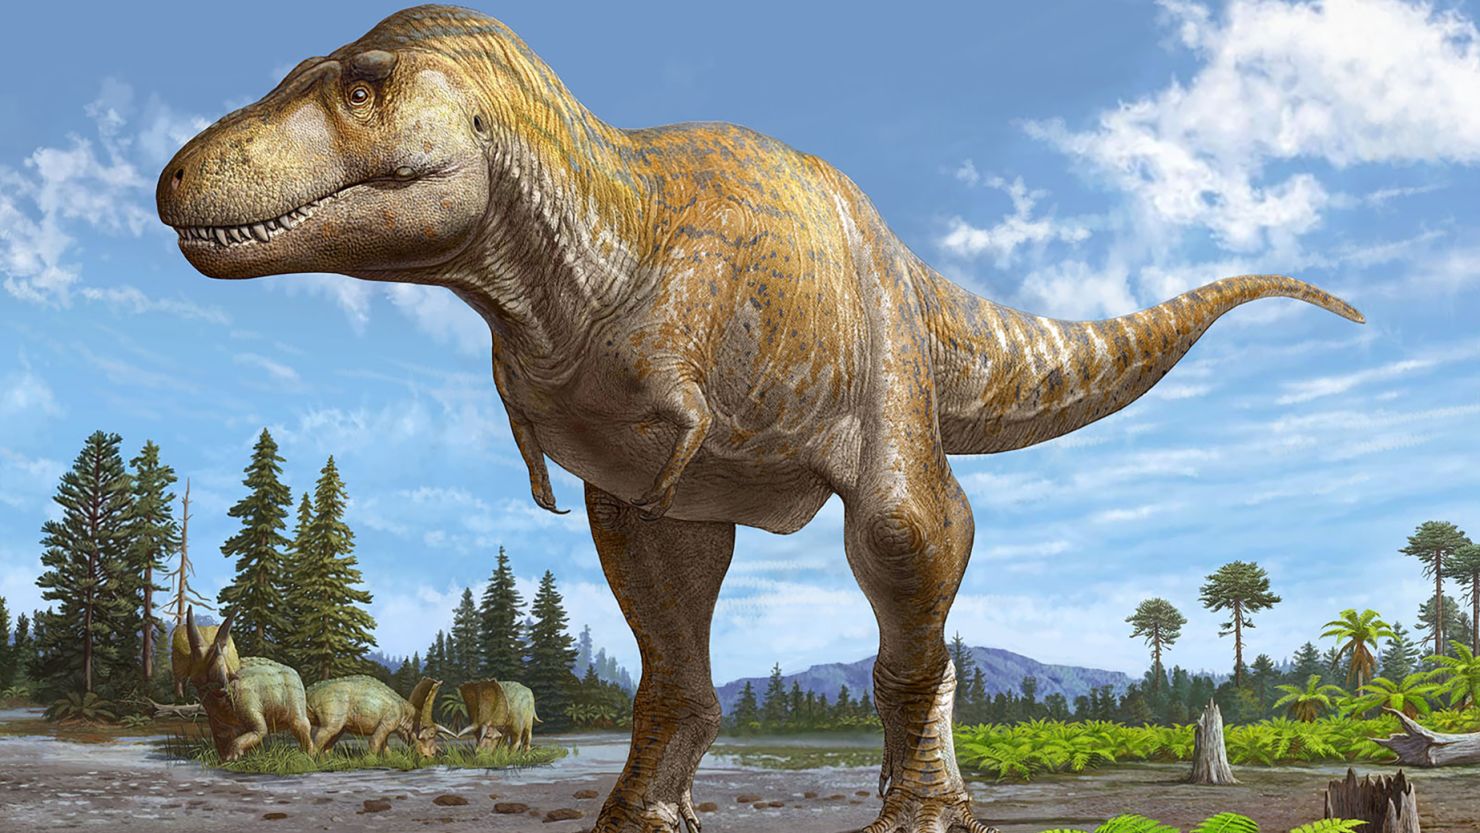 T. rex fossil is actually a species new to science, study says CNN